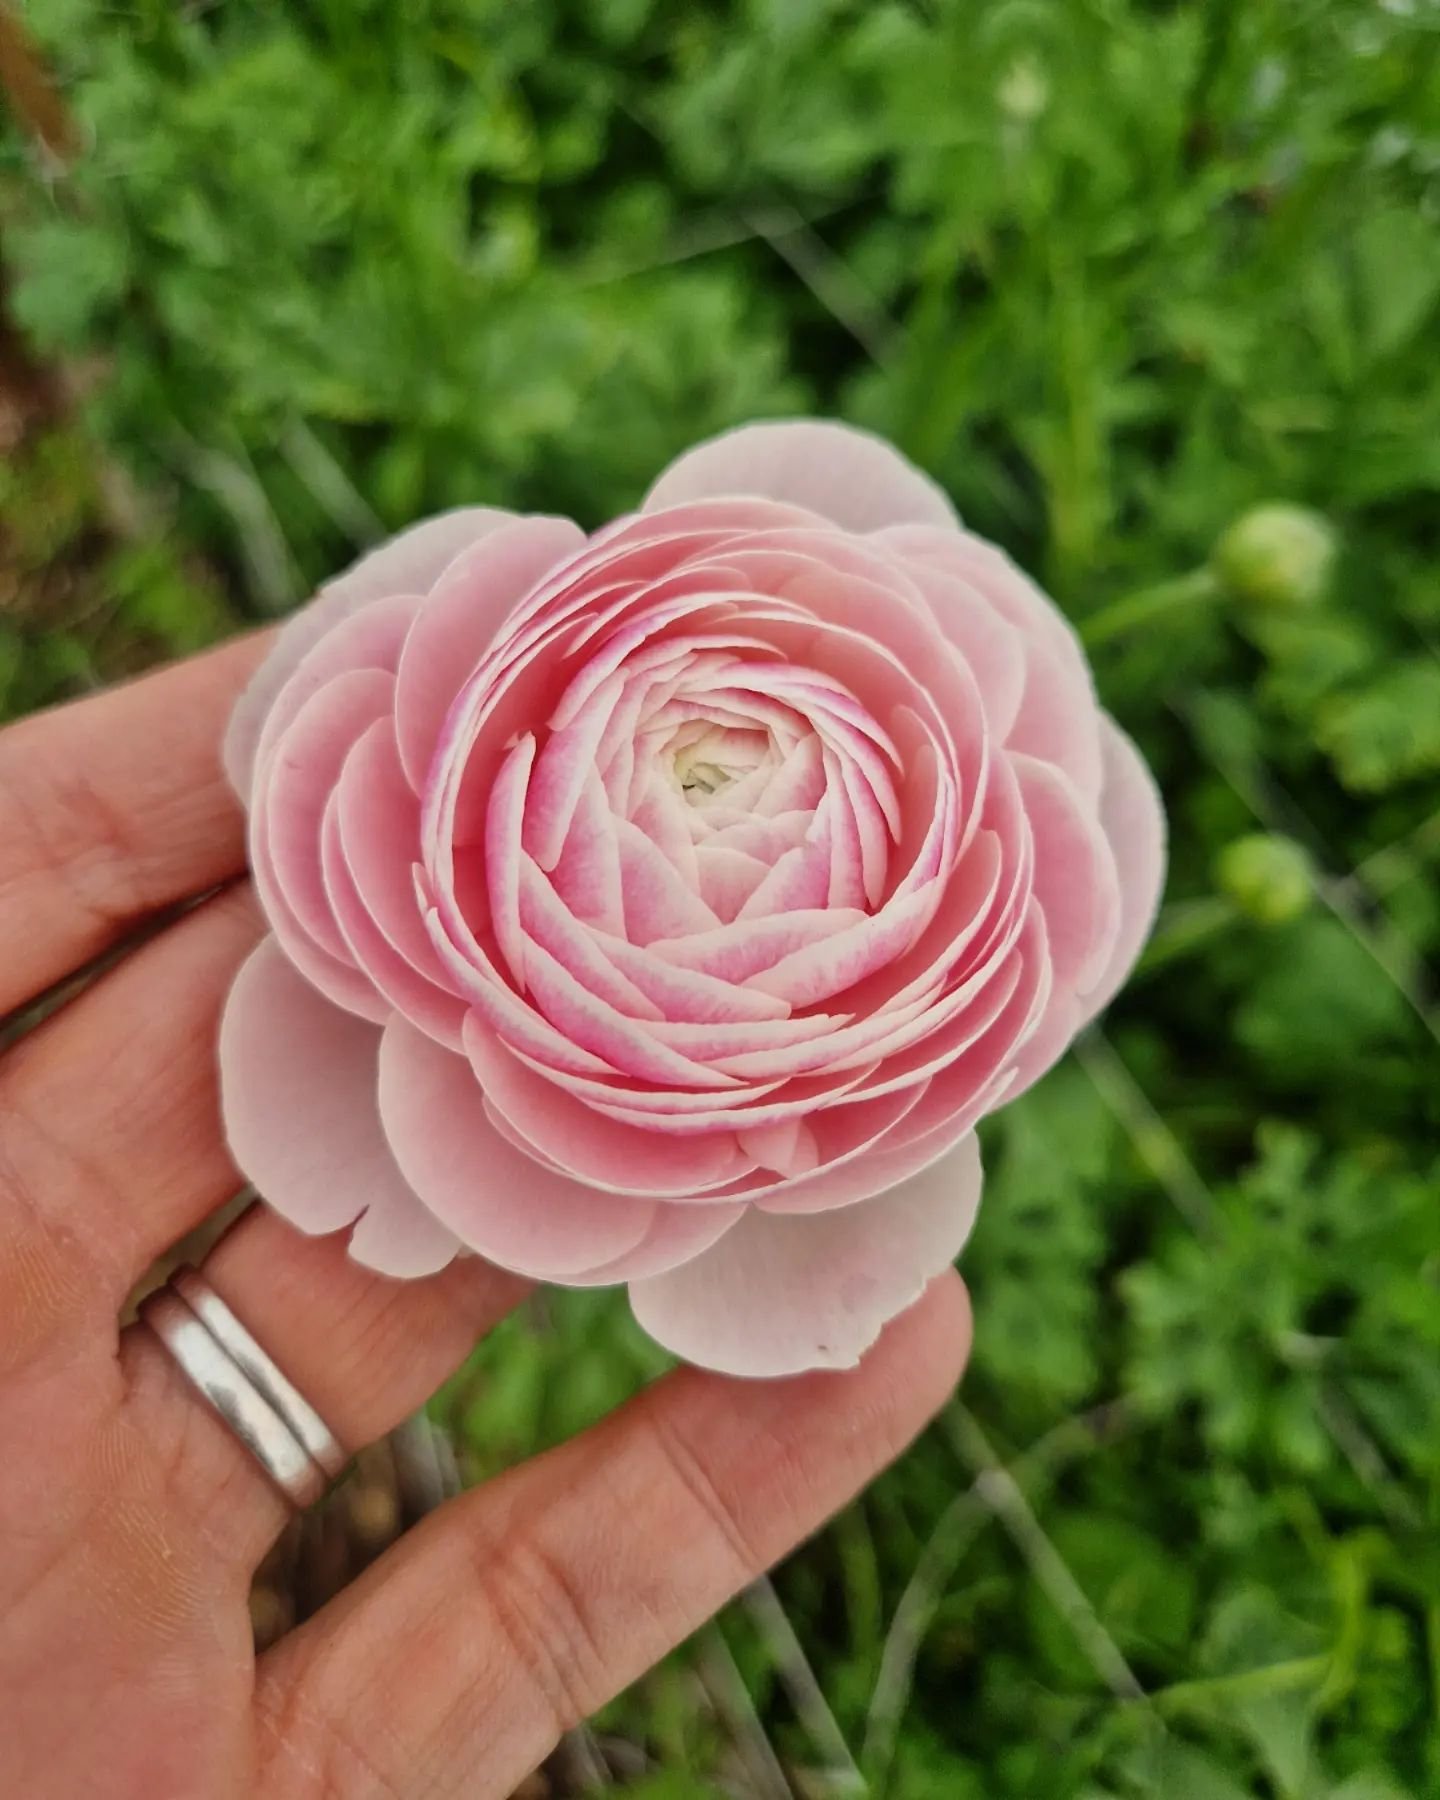 This little beauty is off in one of today's deliveries. Showing perfectly how ranunculus can be a fabulous alternative to roses in a Spring bouquet 🥰

#britishflowers #britishflowersrock #bristollife #growninbristol #grownnotflown #englishflowers #r